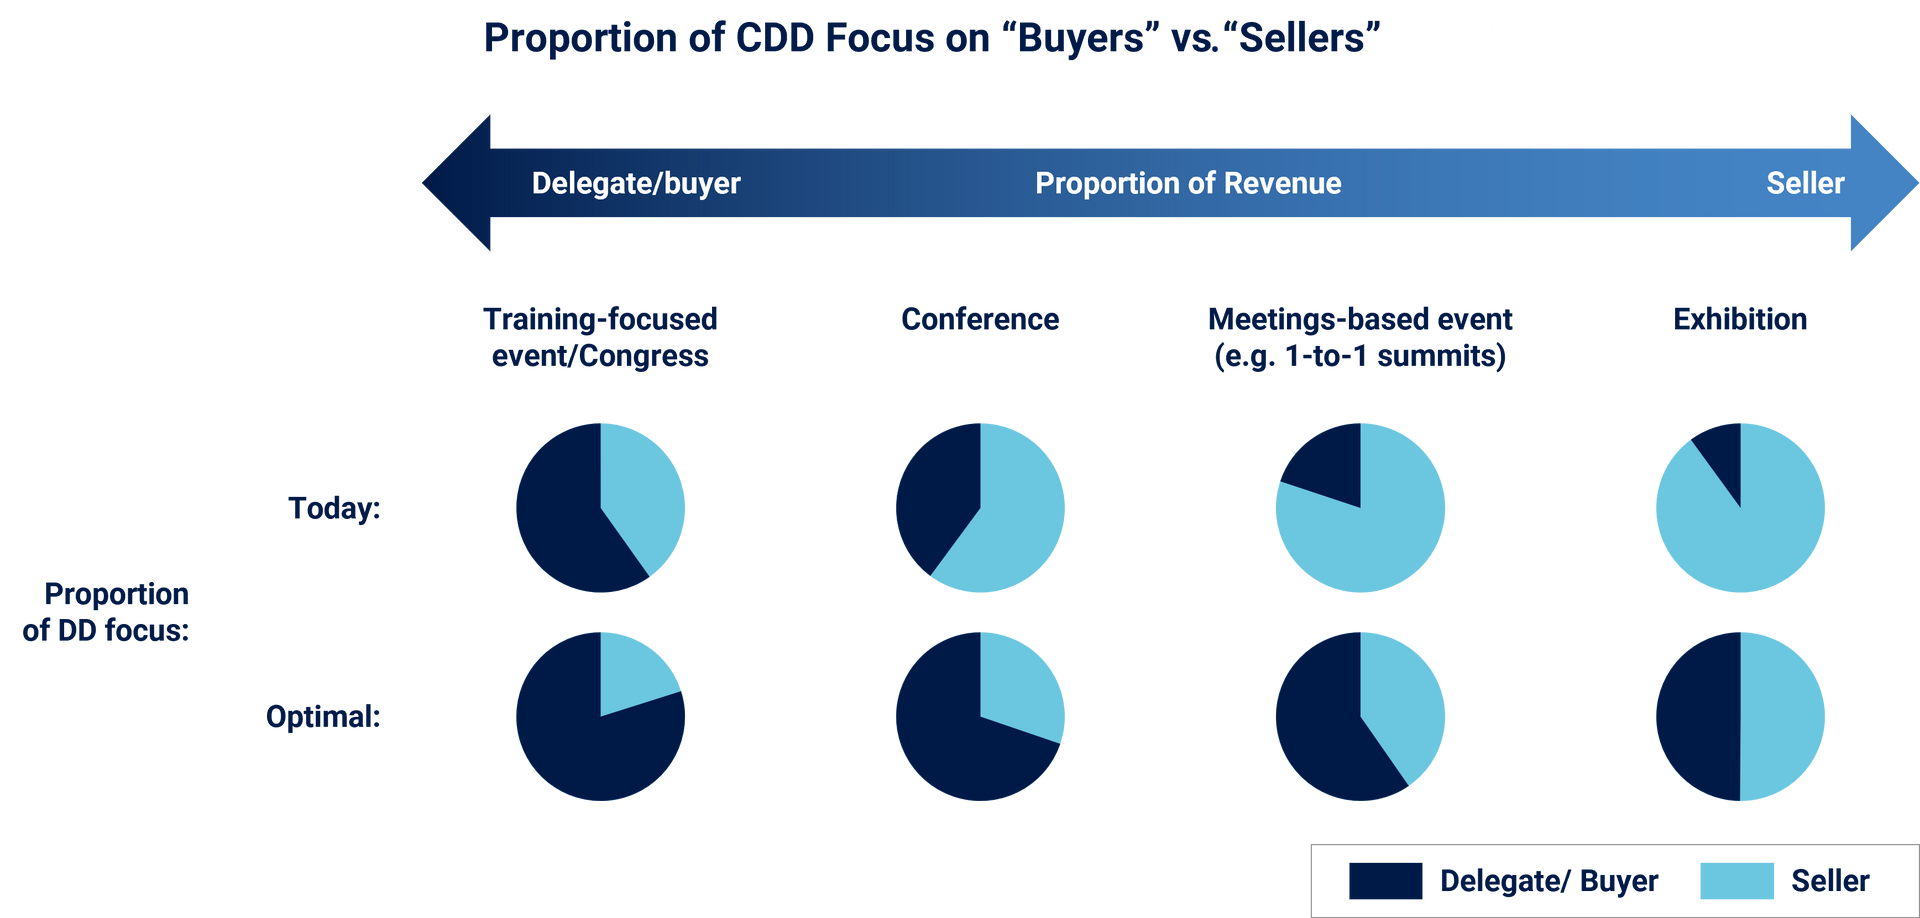 A chart showing the proportion of CDD focus on buyers vs sellers, with their proportion of revenue as well as DD focus.